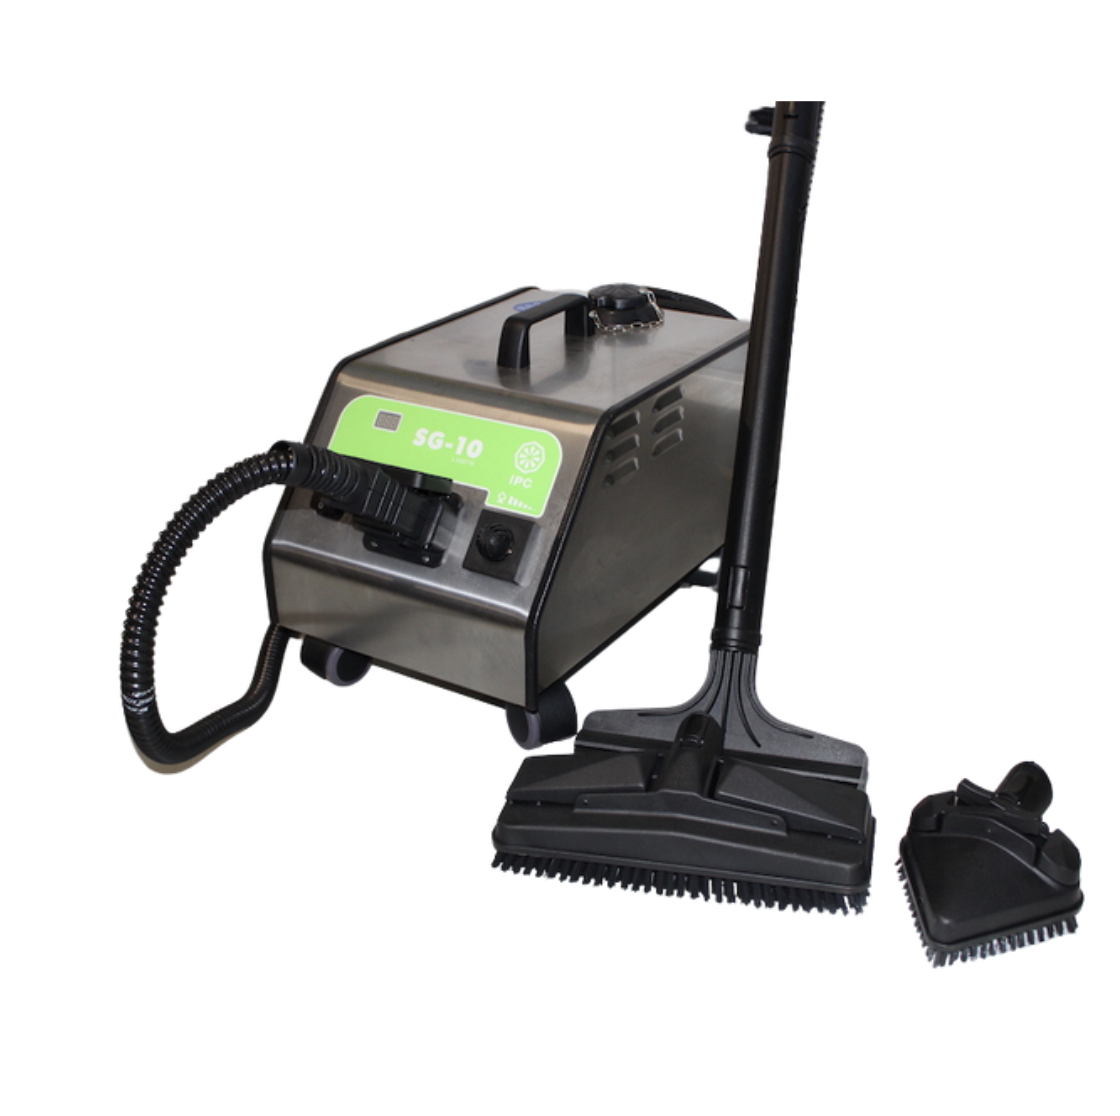 Steam Cleaner Hire | Mobile IPC Sg - 10